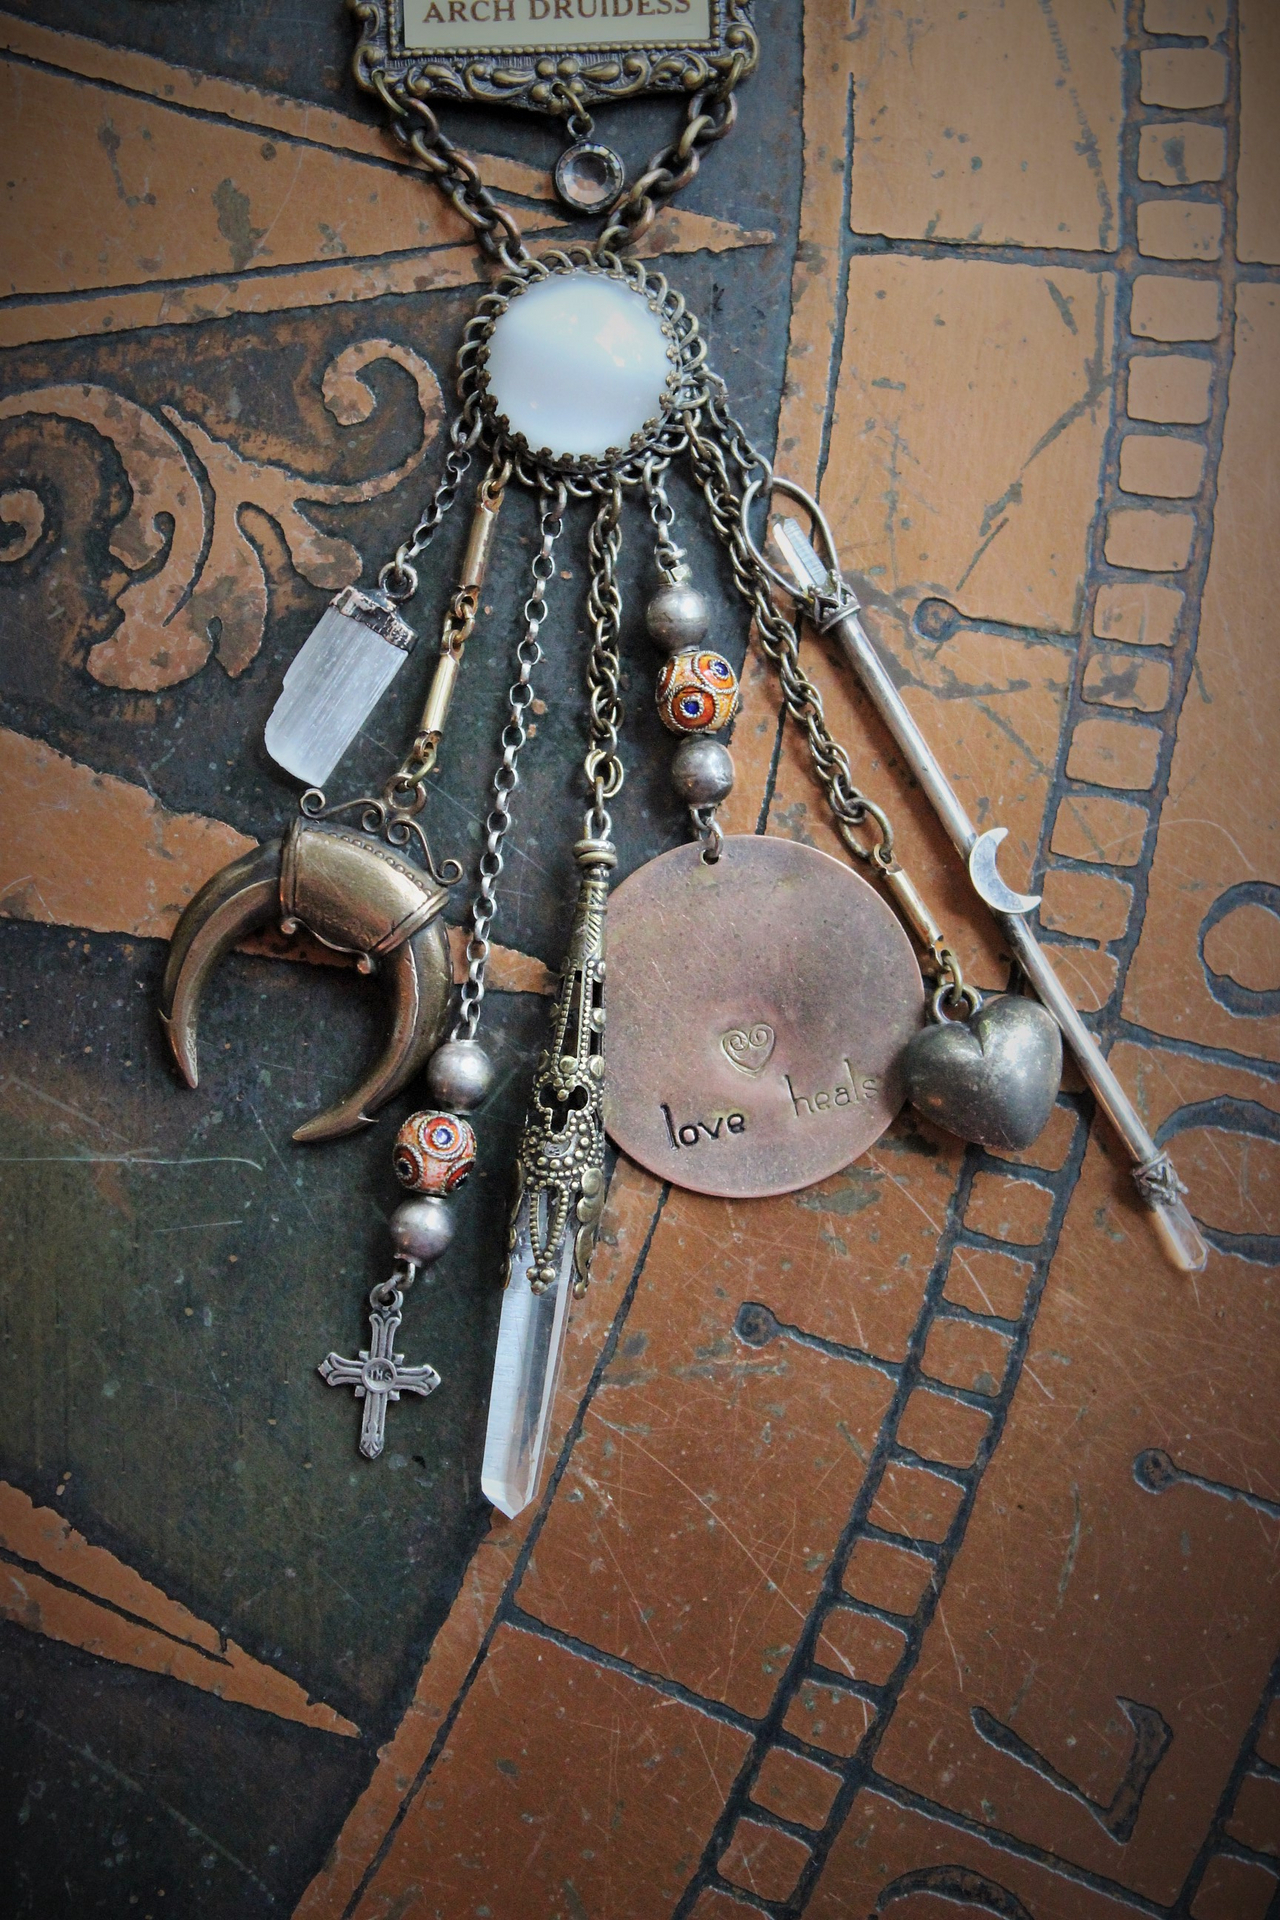 The Druidess Necklace with 1916 Druidess Badge, Antique Link Chain, Sterling Quartz Point & Crescent Moon Sceptor, Antique Moon Glow Cabochon & Much More!